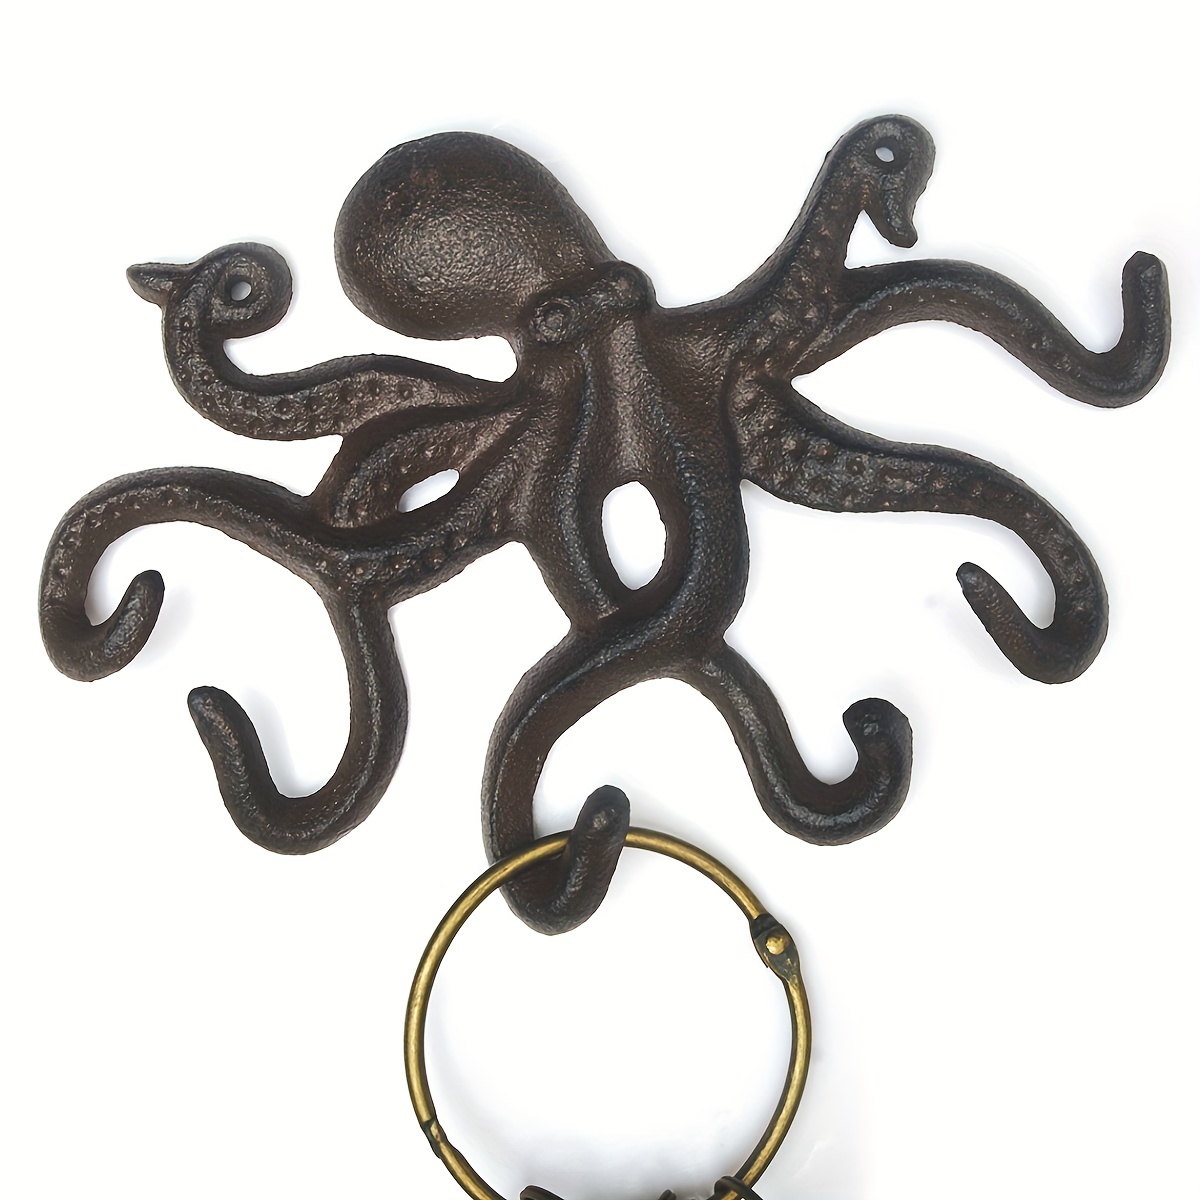 1pc Key Holder For Wall, Octopus Coat Hooks Wall Mounted Towel Hooks, Heavy  Duty Wall Hooks Decorative With 6 Arms